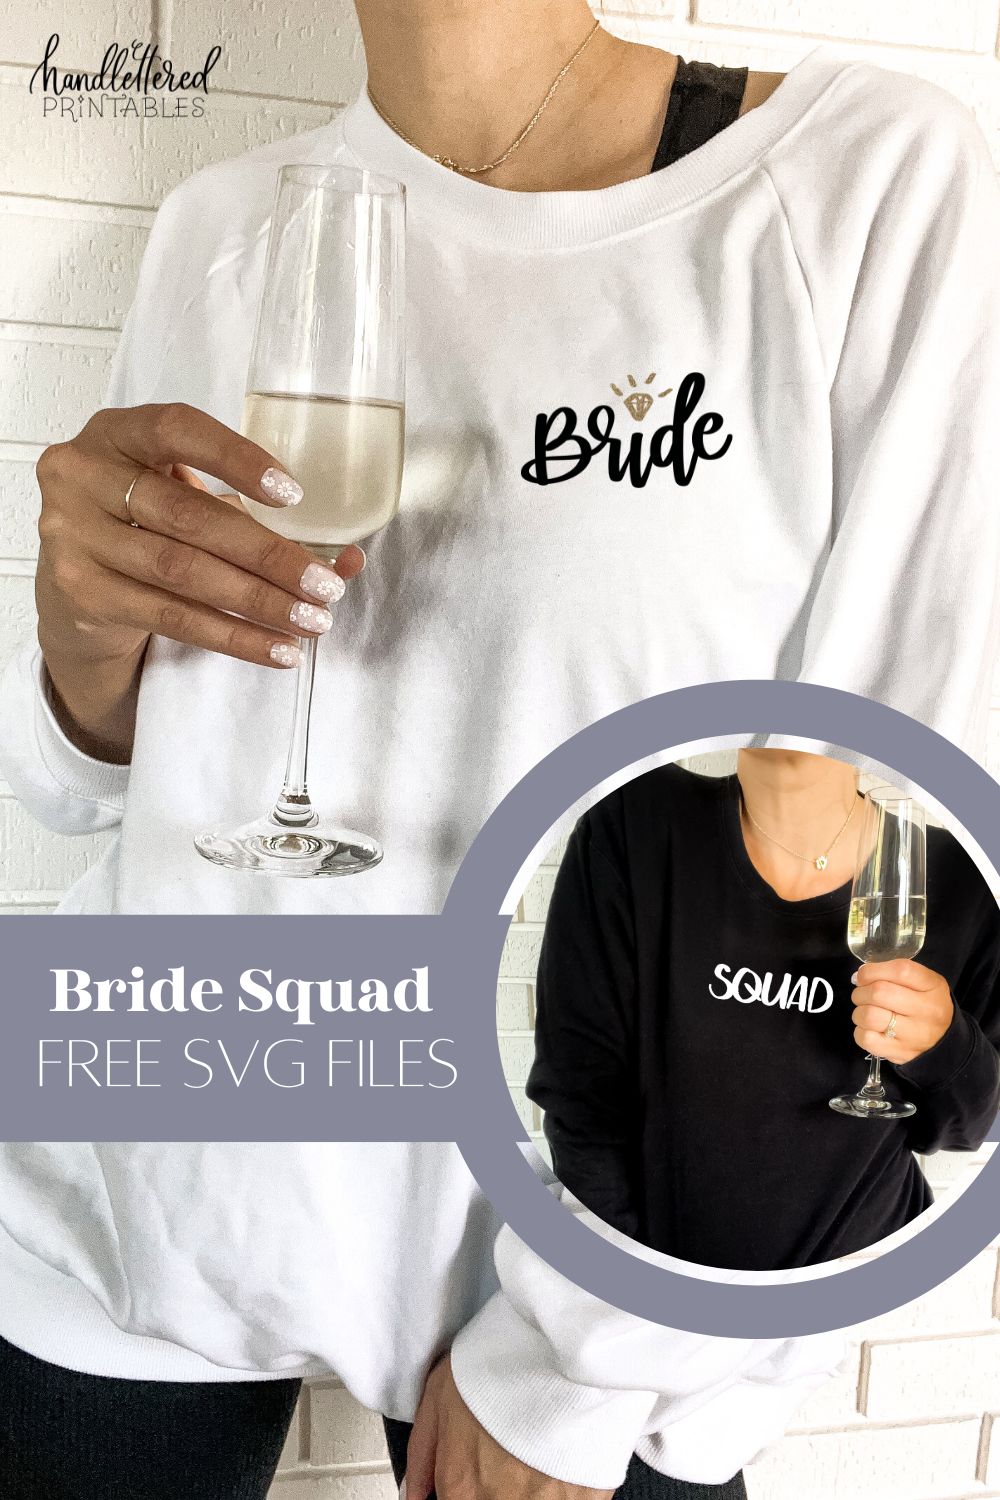 bride squad free svg files text over image of girl in white sweater that reads bride in hand lettered script holding champagne. Second image shows woman holding champagne in white sweater that reads squad